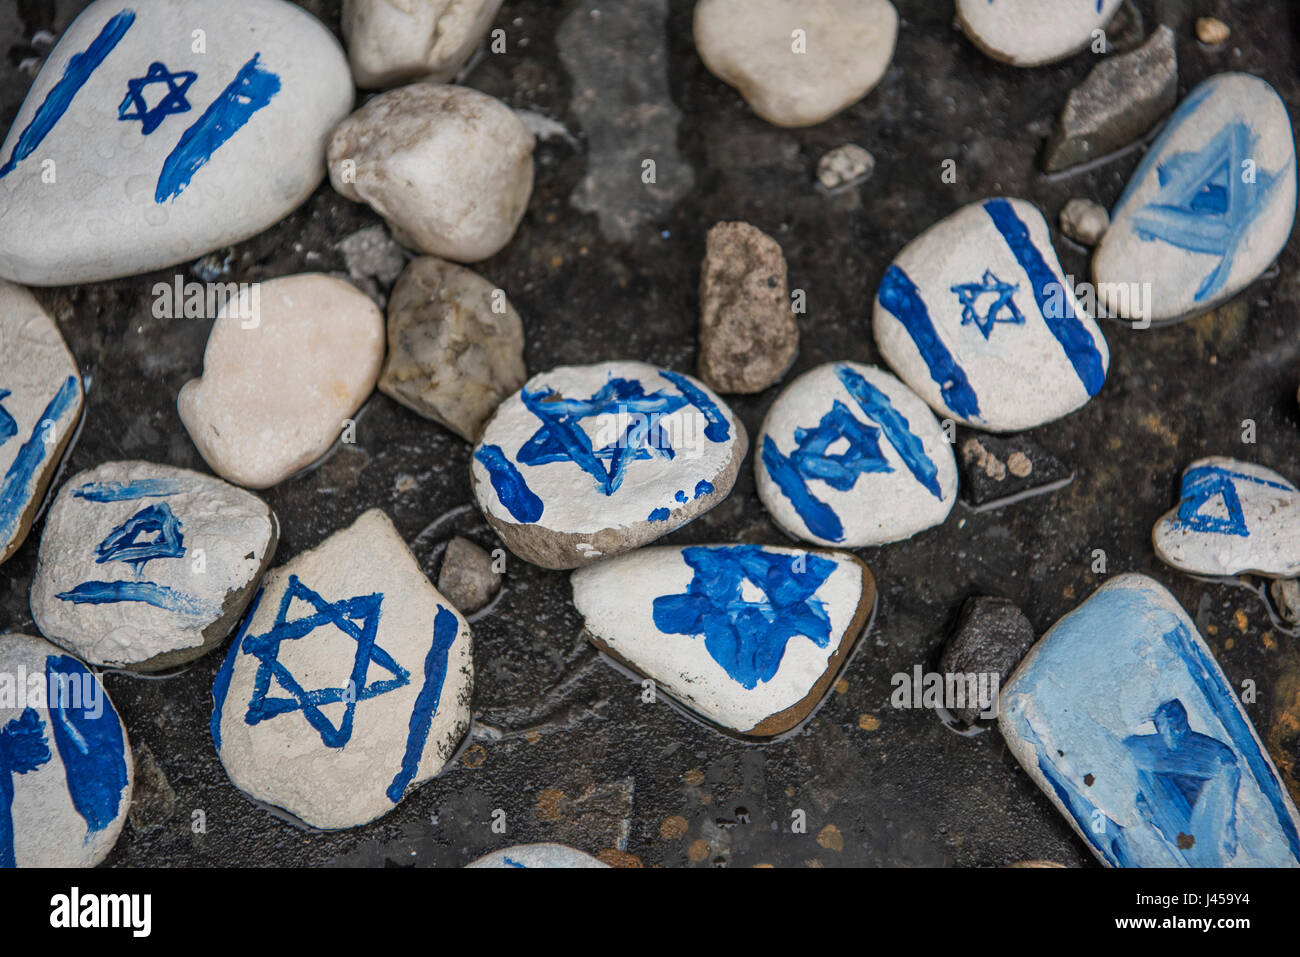 Hand painted stones with the Star of David painted on them left by visitors at the base of the Warsaw Ghetto Heroes Monument. Stock Photo